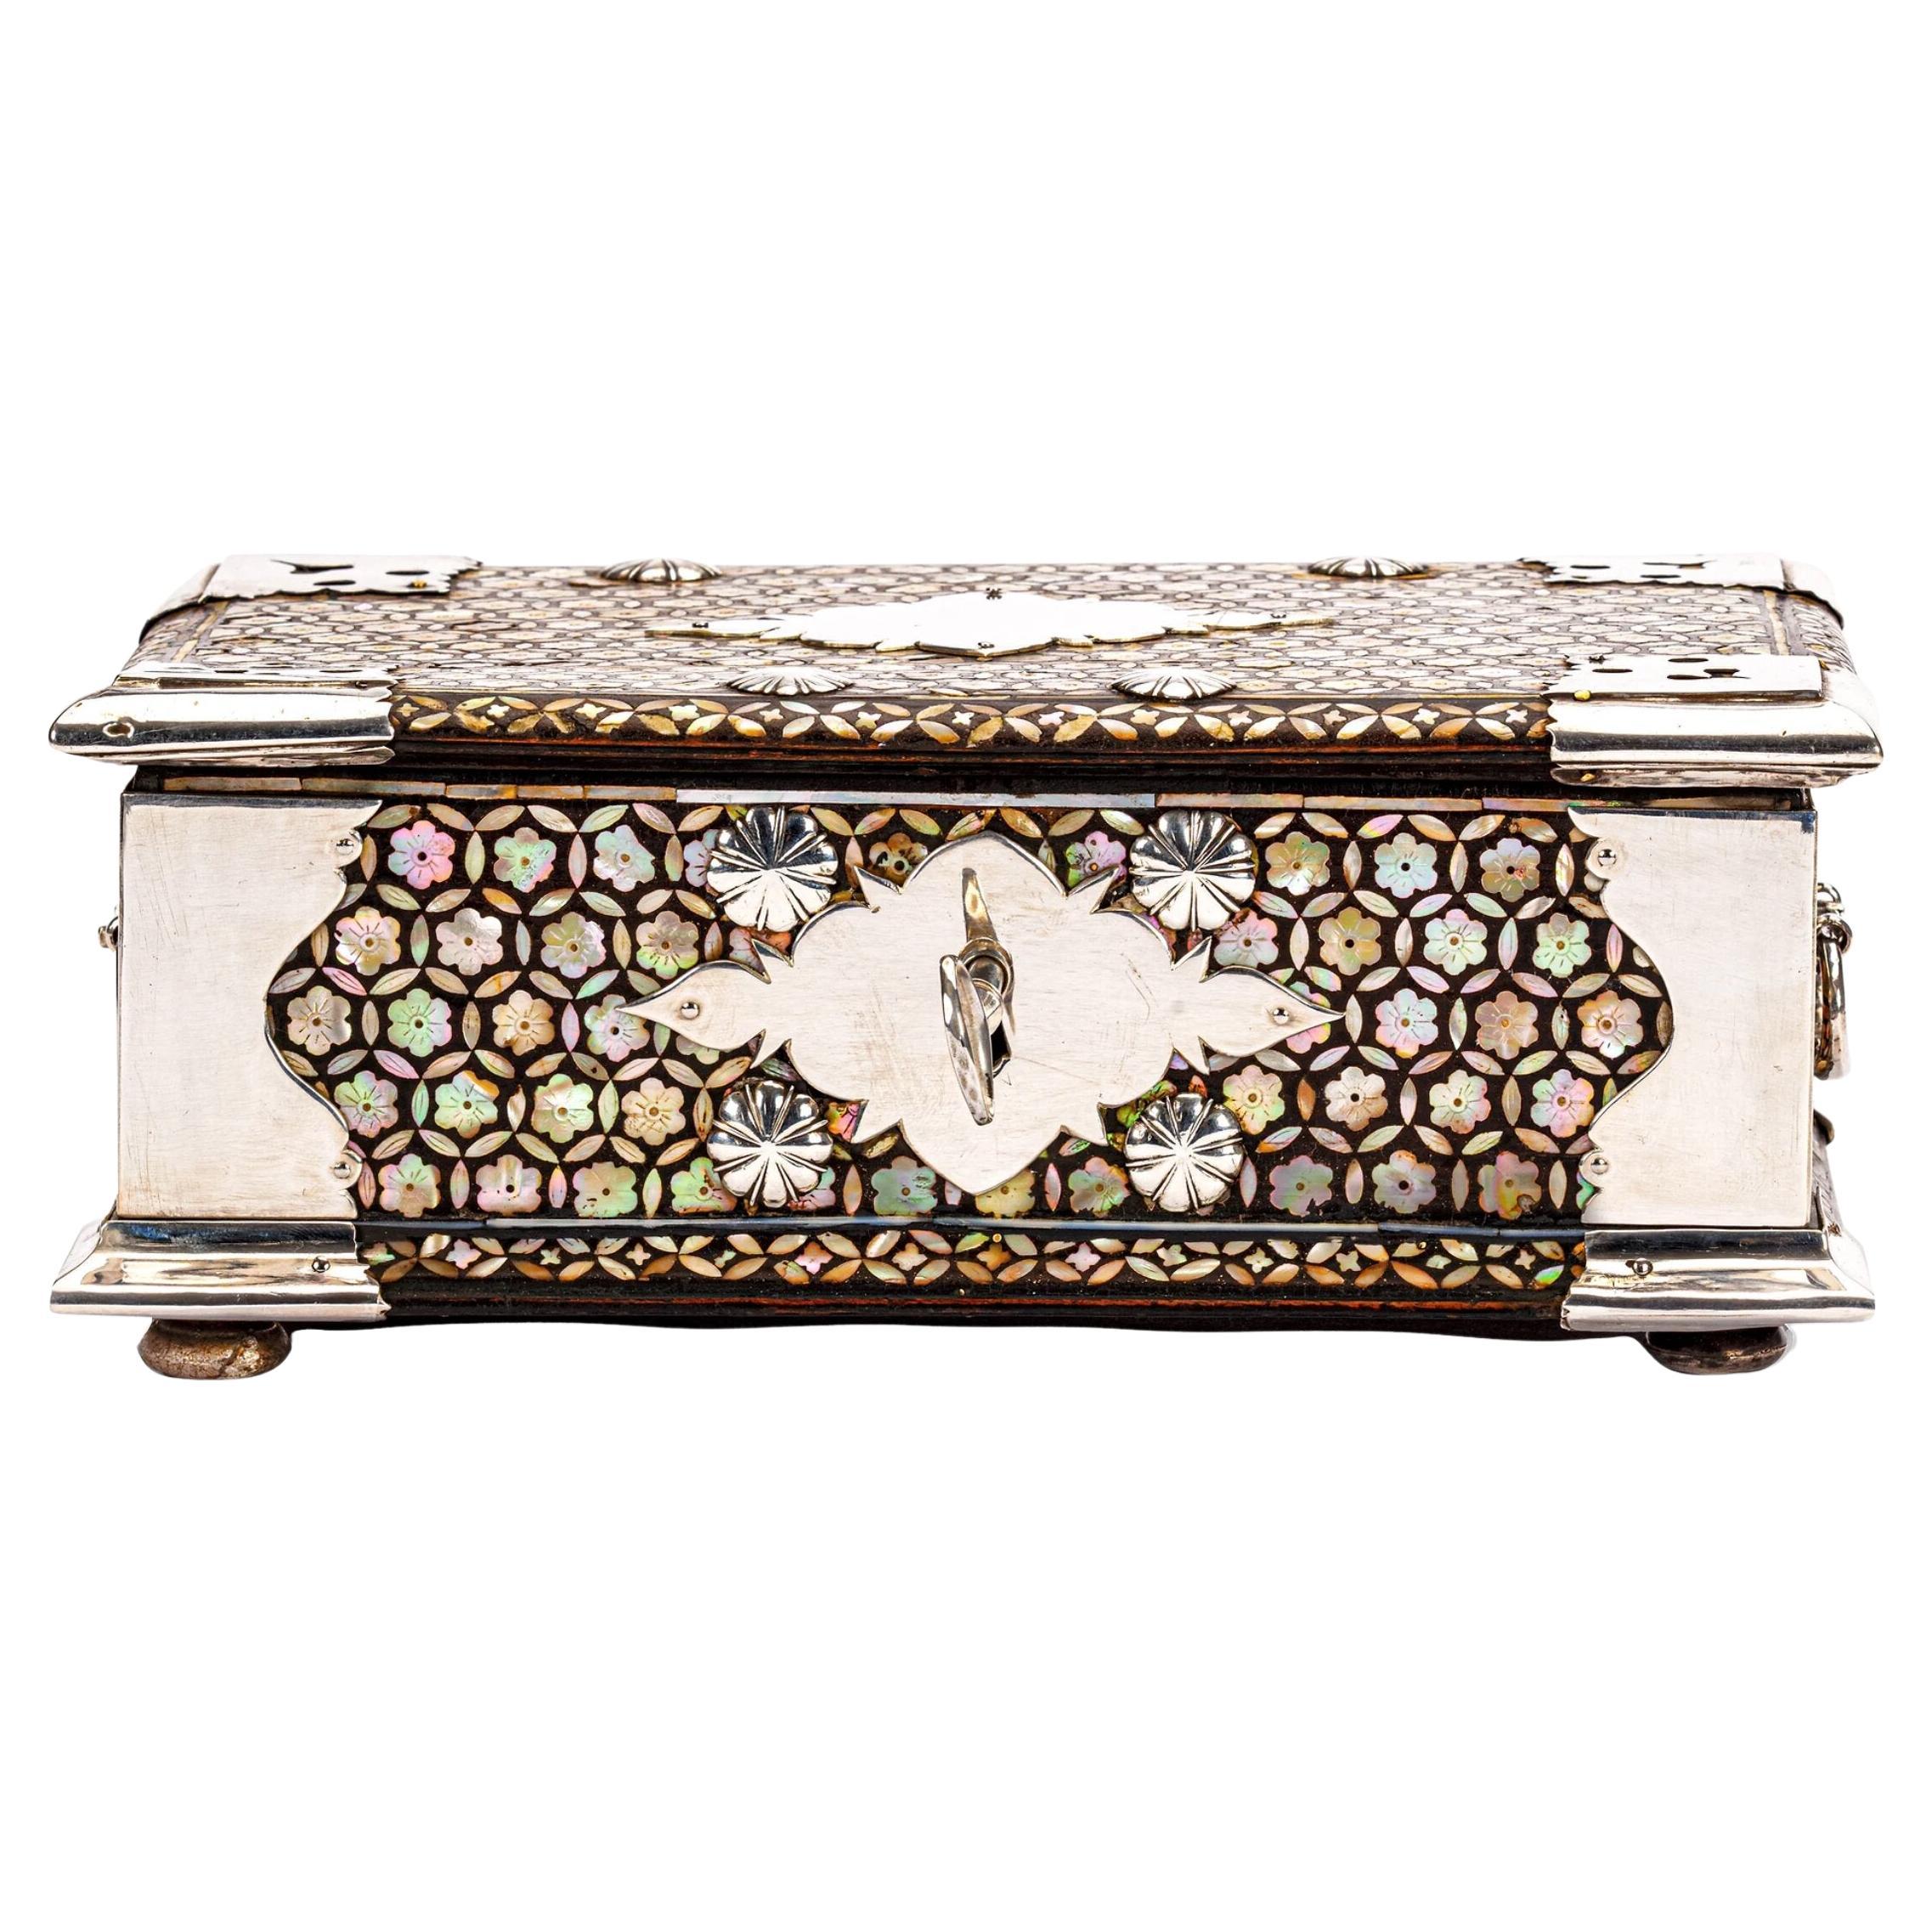 18th-century Dutch-colonial Peranakan mother-of-pearl casket with silver mounts